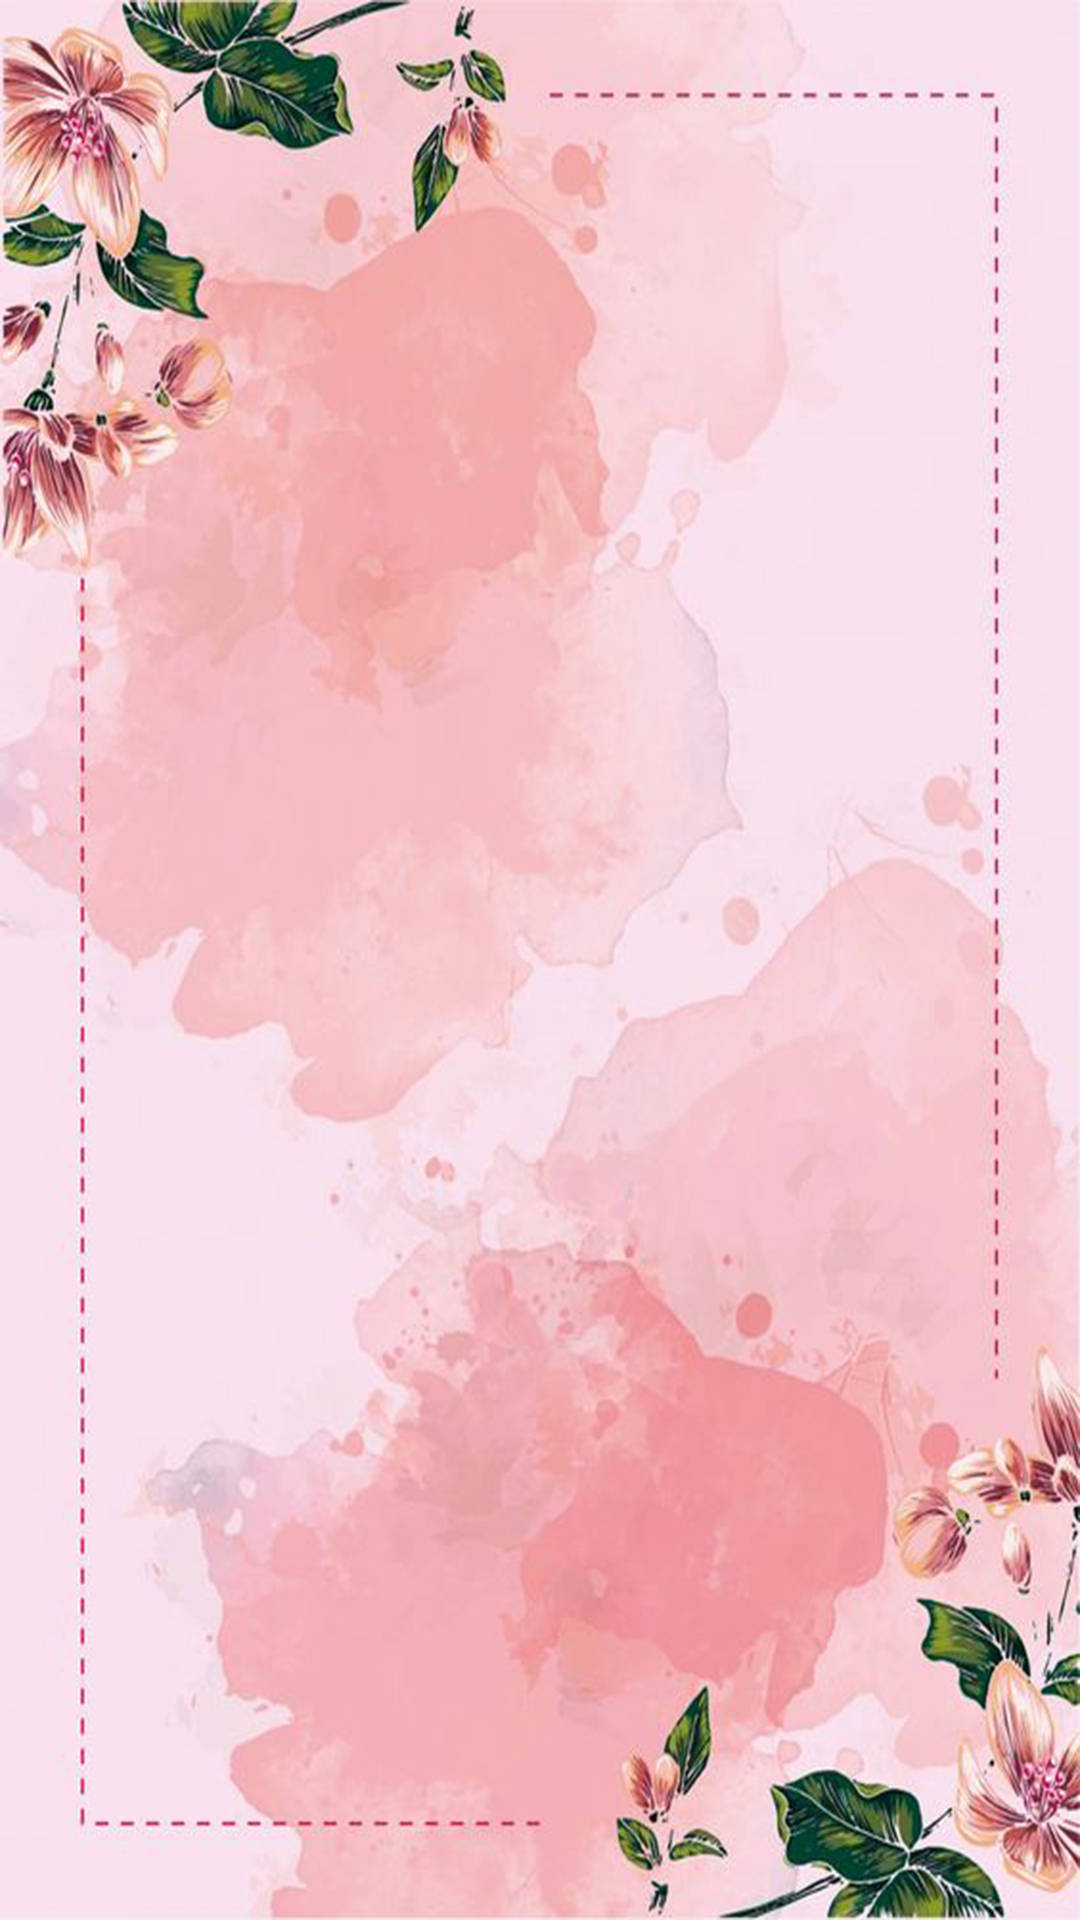 Instagram Story Creative Watercolor Flower Background